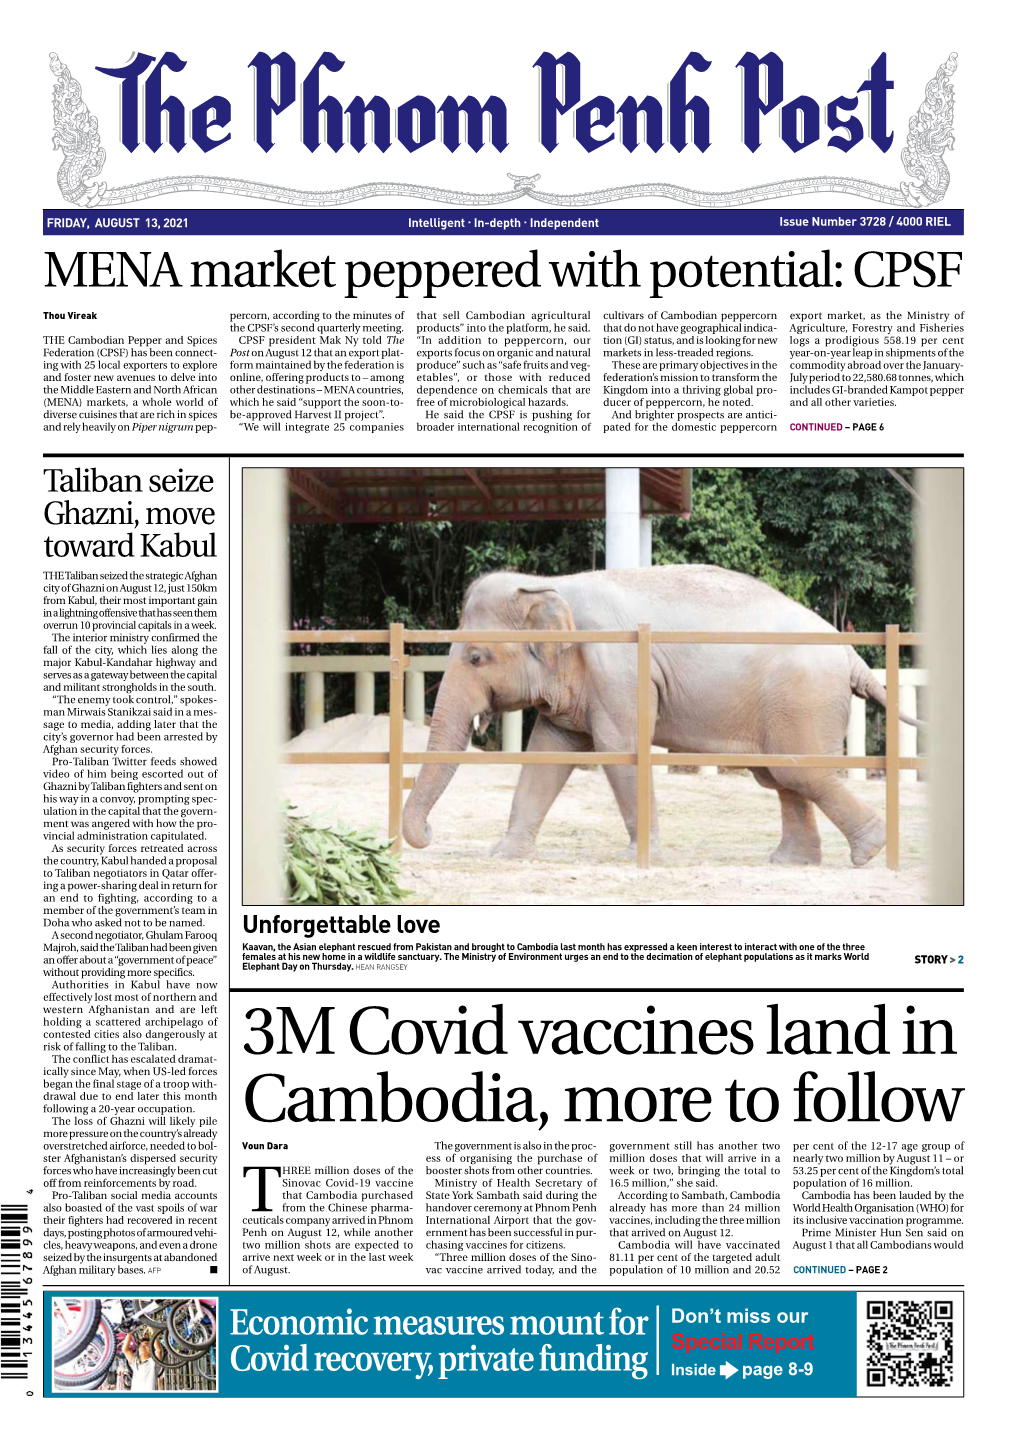 3M Covid Vaccines Land in Cambodia, More to Follow